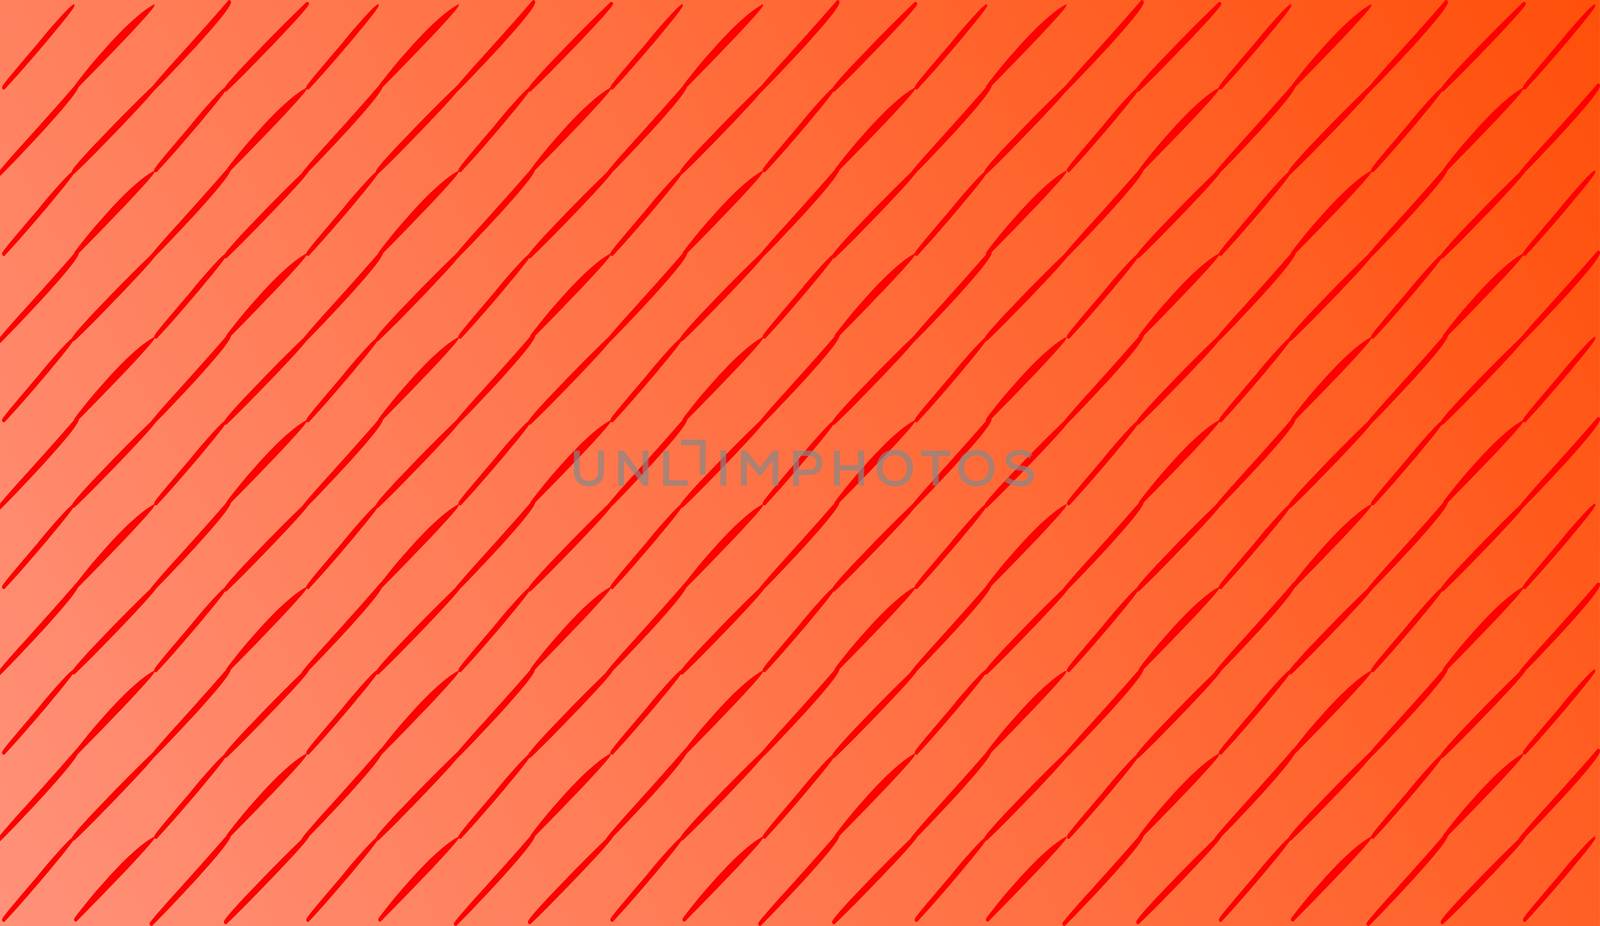 abstract background with diagonal red cartoon lines by Andreajk3